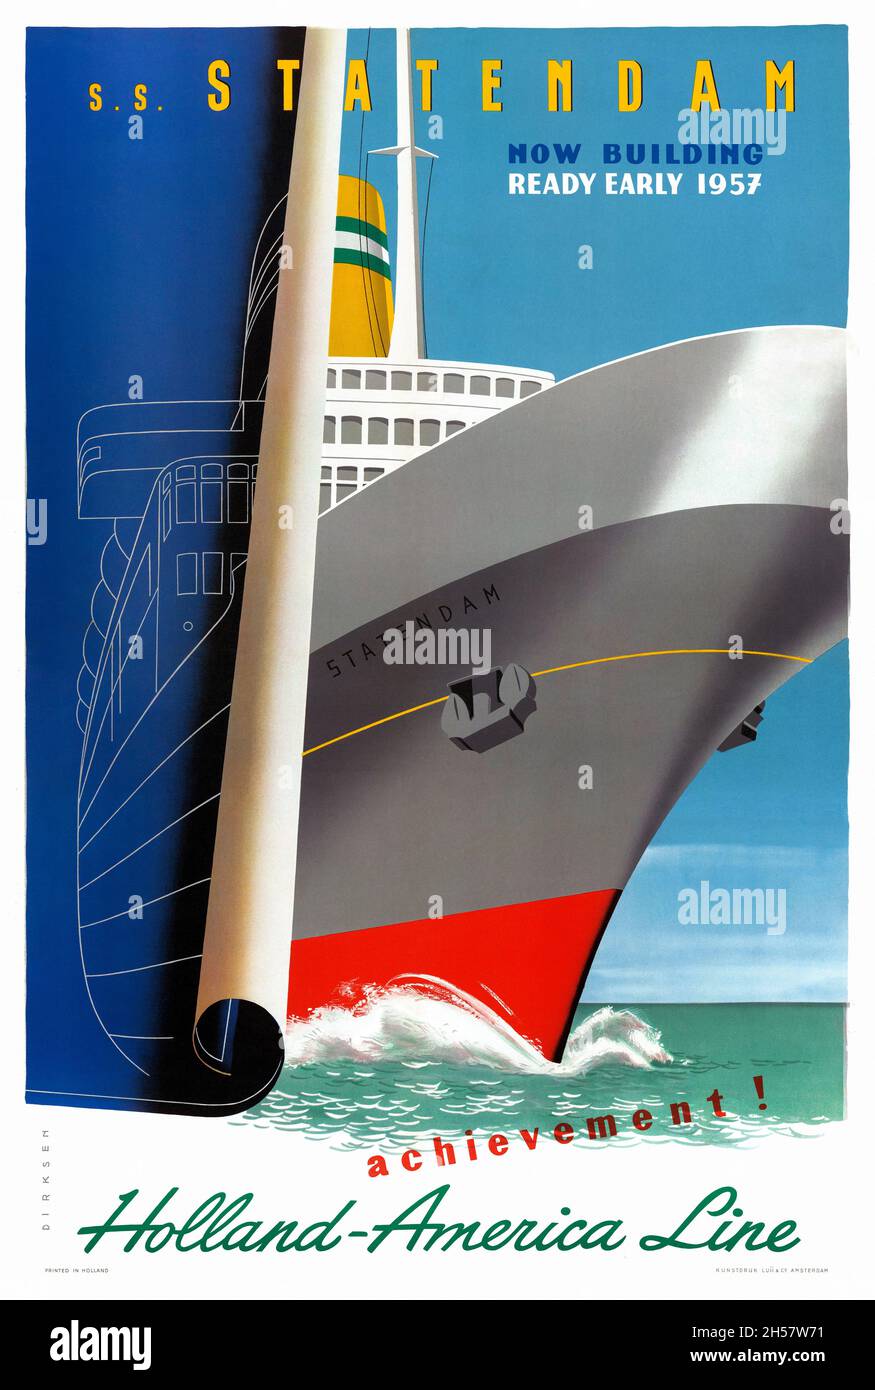 S.S. Statendam Holland-America Line by Reyn Dirksen (1924-1999). Poster published in 1956 in the Netherlands. Stock Photo